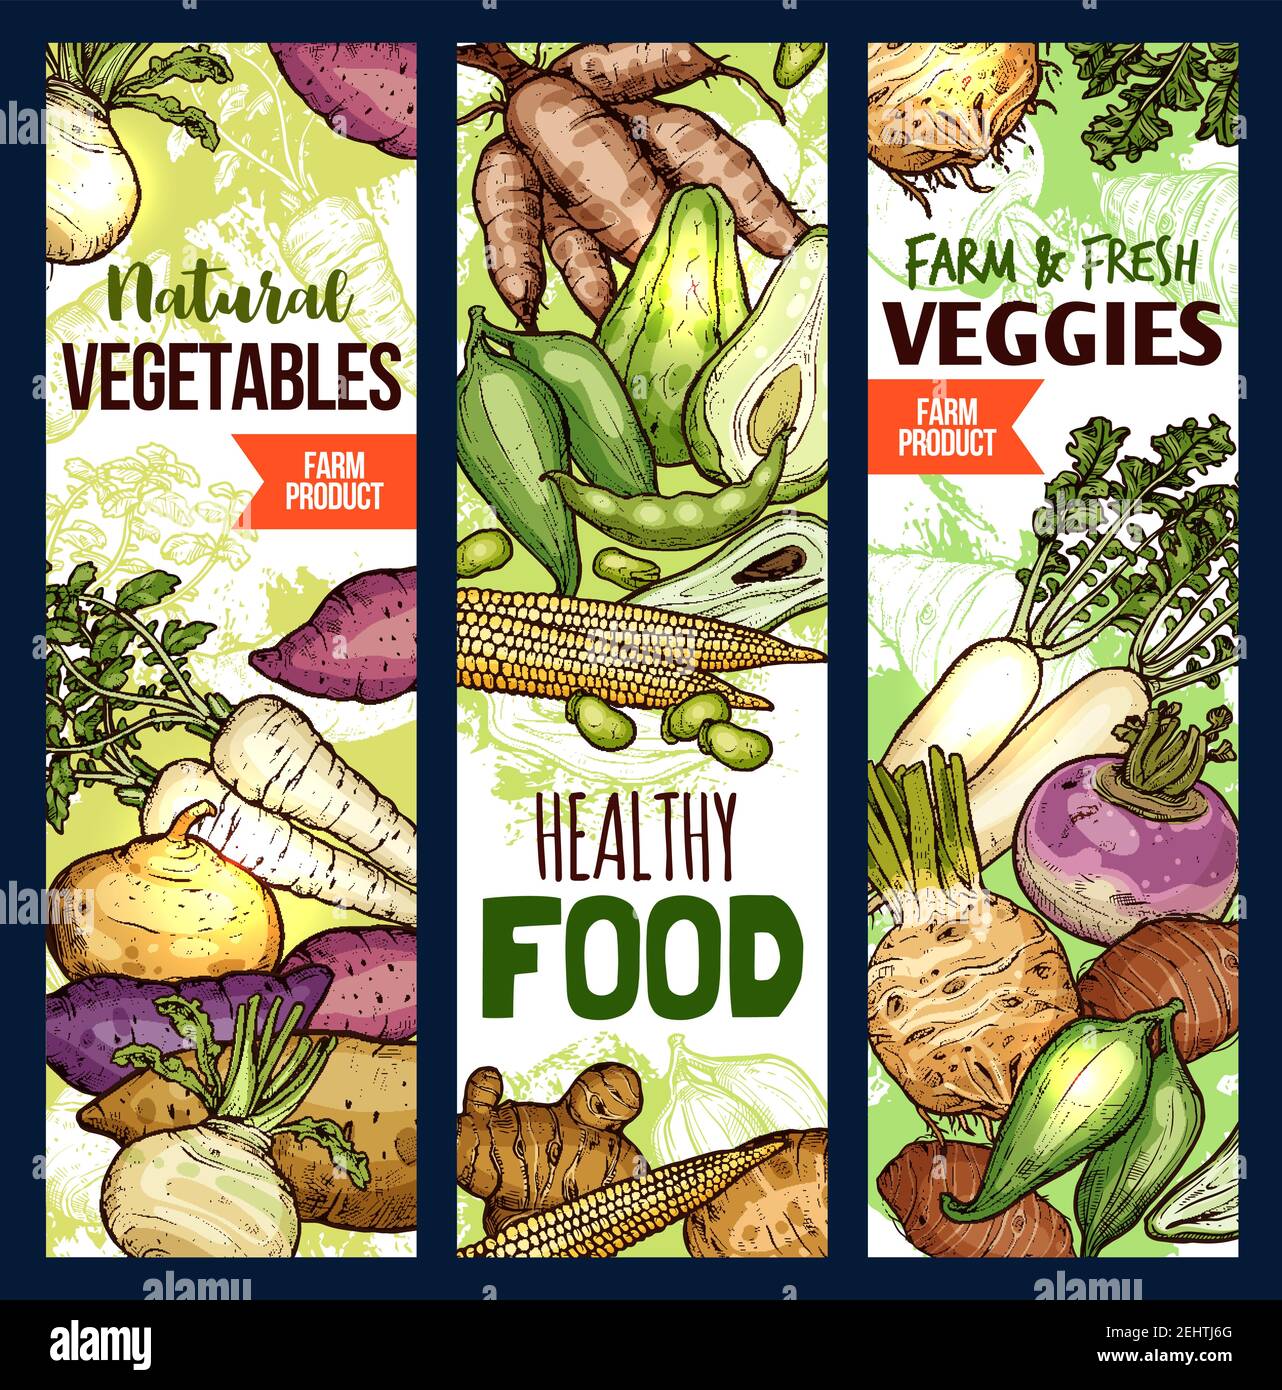 Vegetables healthy food sketch banners. Vector potato and beetroot, celery and arracacia, avocado and peas, corn and beans, jicama. Exotic farm produc Stock Vector